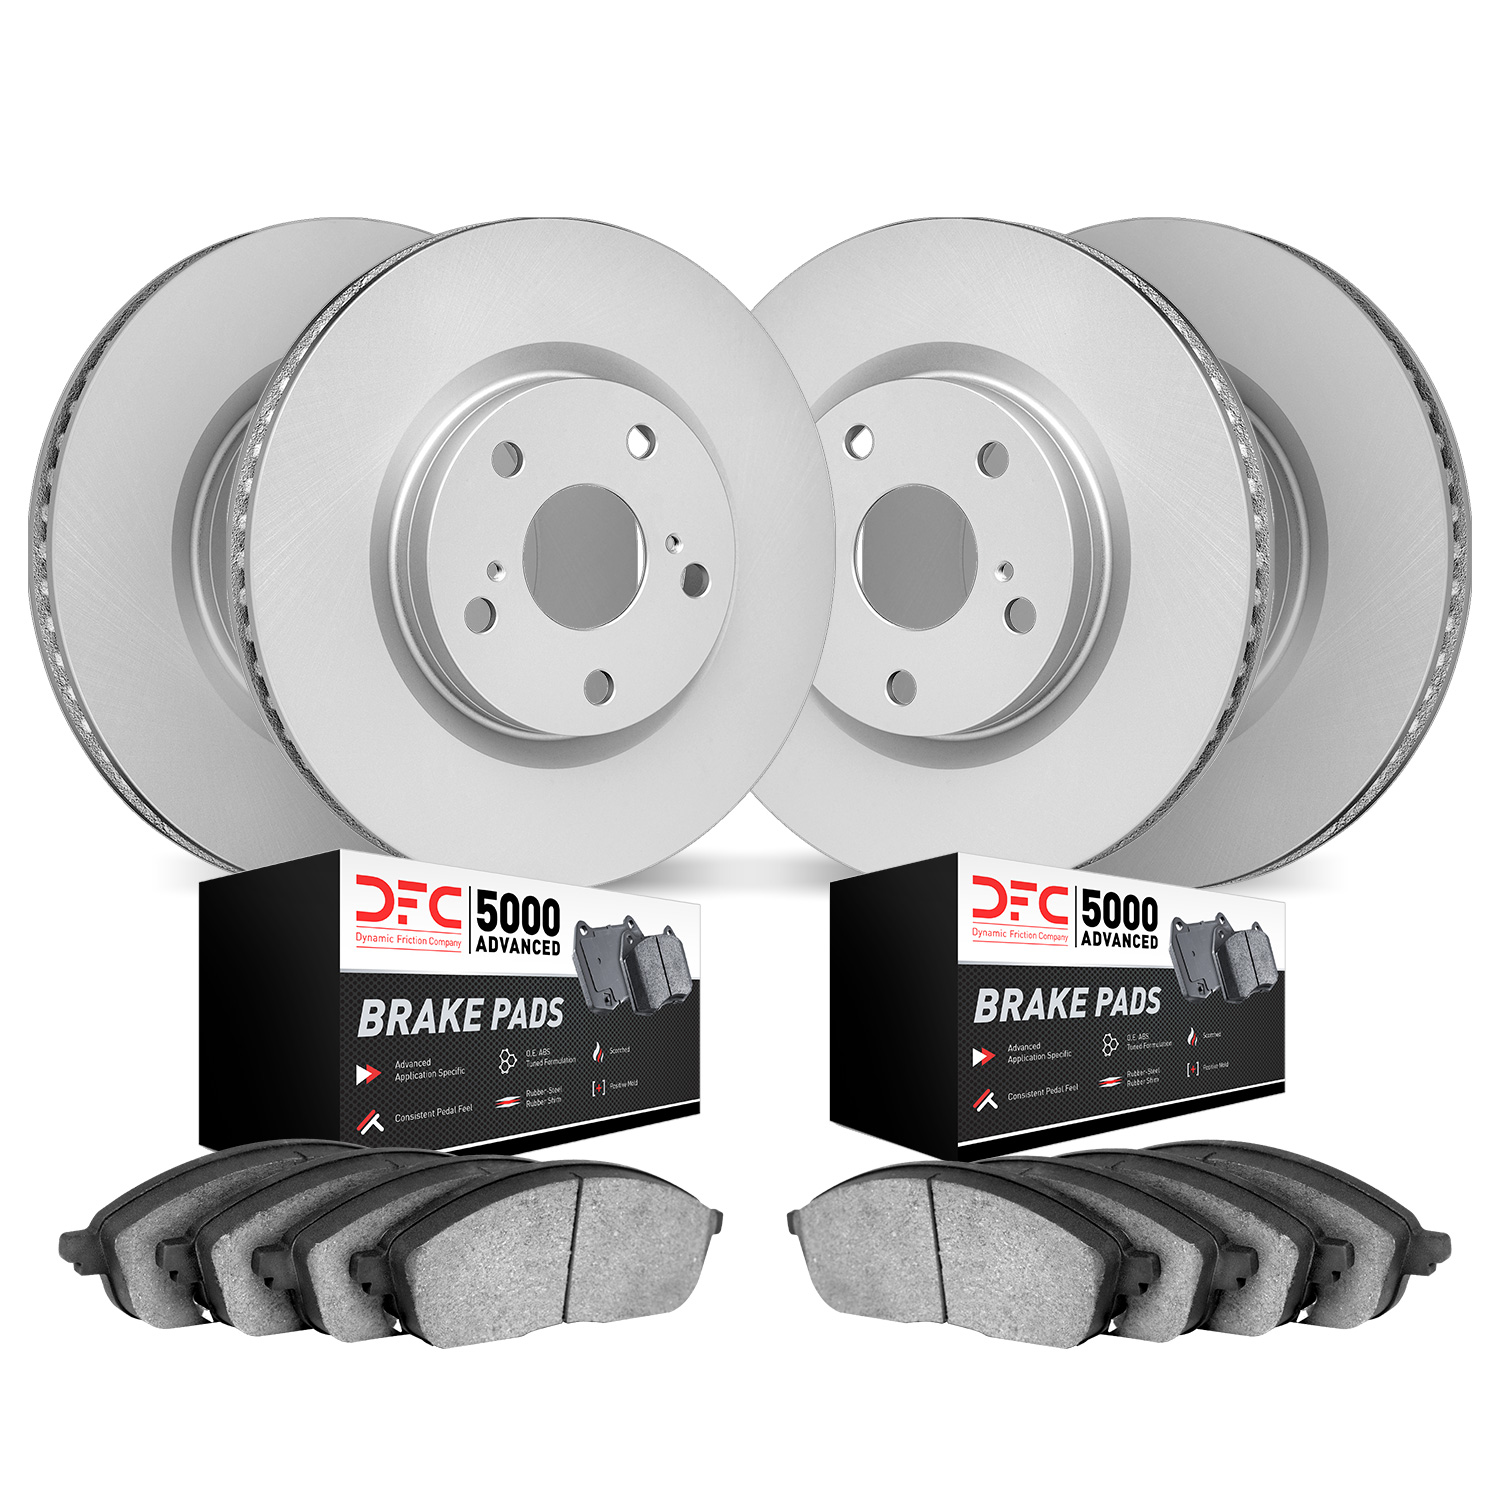 4504-65019 Geospec Brake Rotors w/5000 Advanced Brake Pads Kit, 2002-2010 GM, Position: Front and Rear